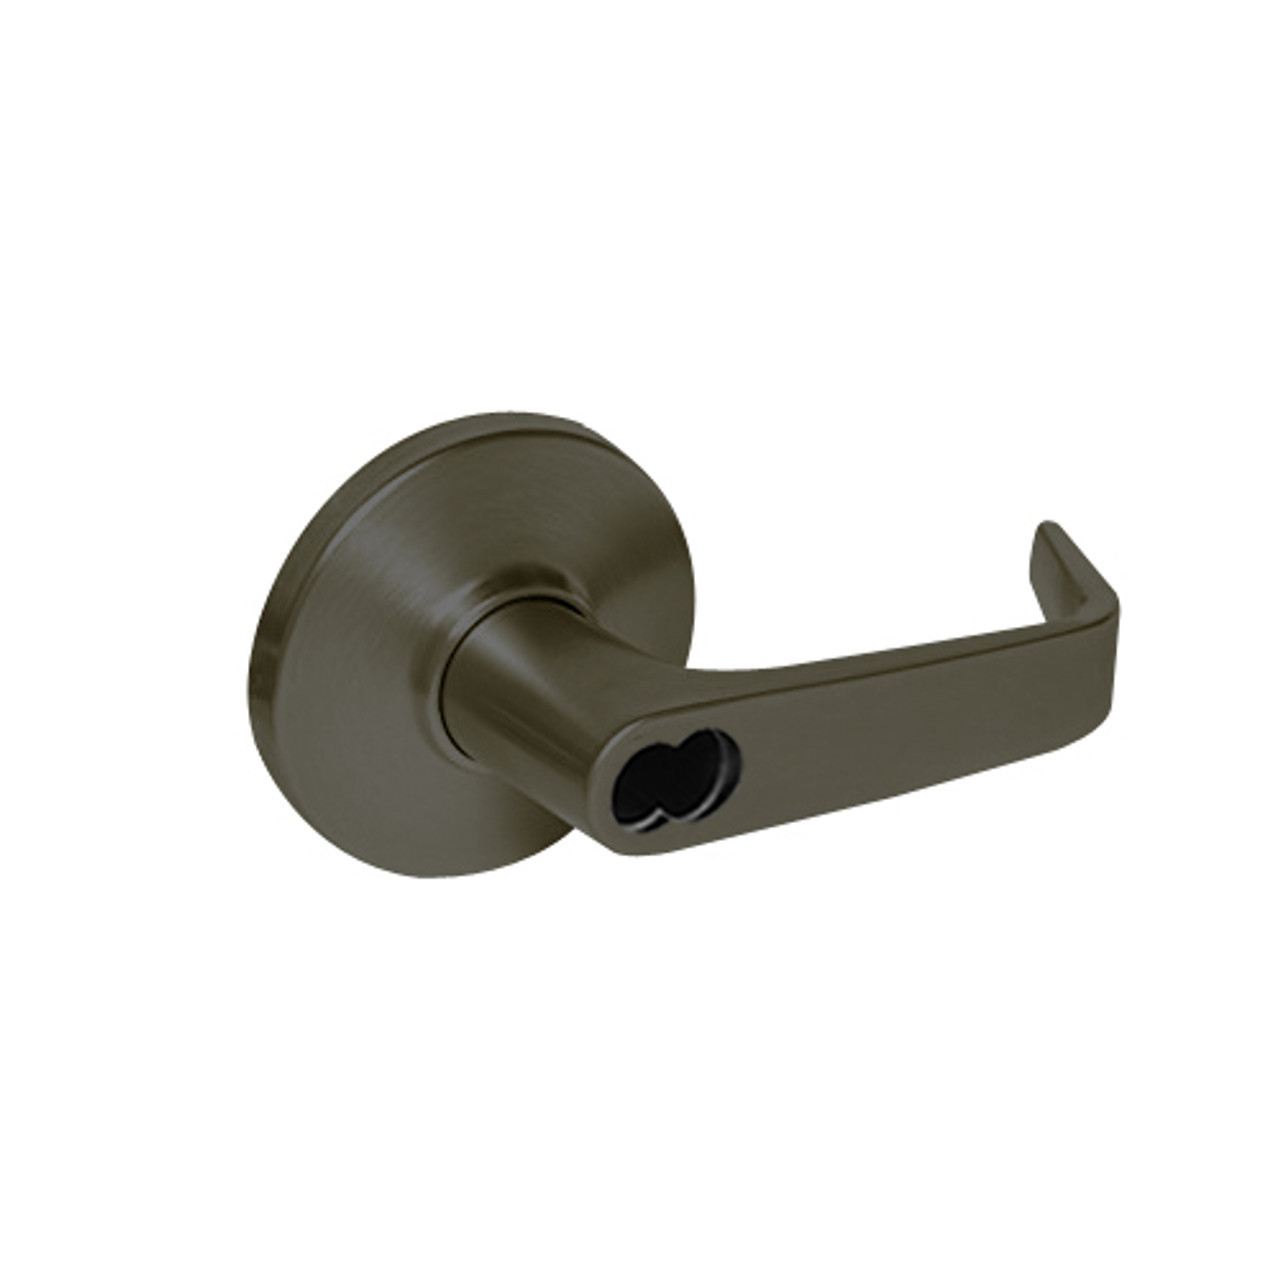 9K37RD15DSTK613LM Best 9K Series Special Function Cylindrical Lever Locks with Contour Angle with Return Lever Design Accept 7 Pin Best Core in Oil Rubbed Bronze